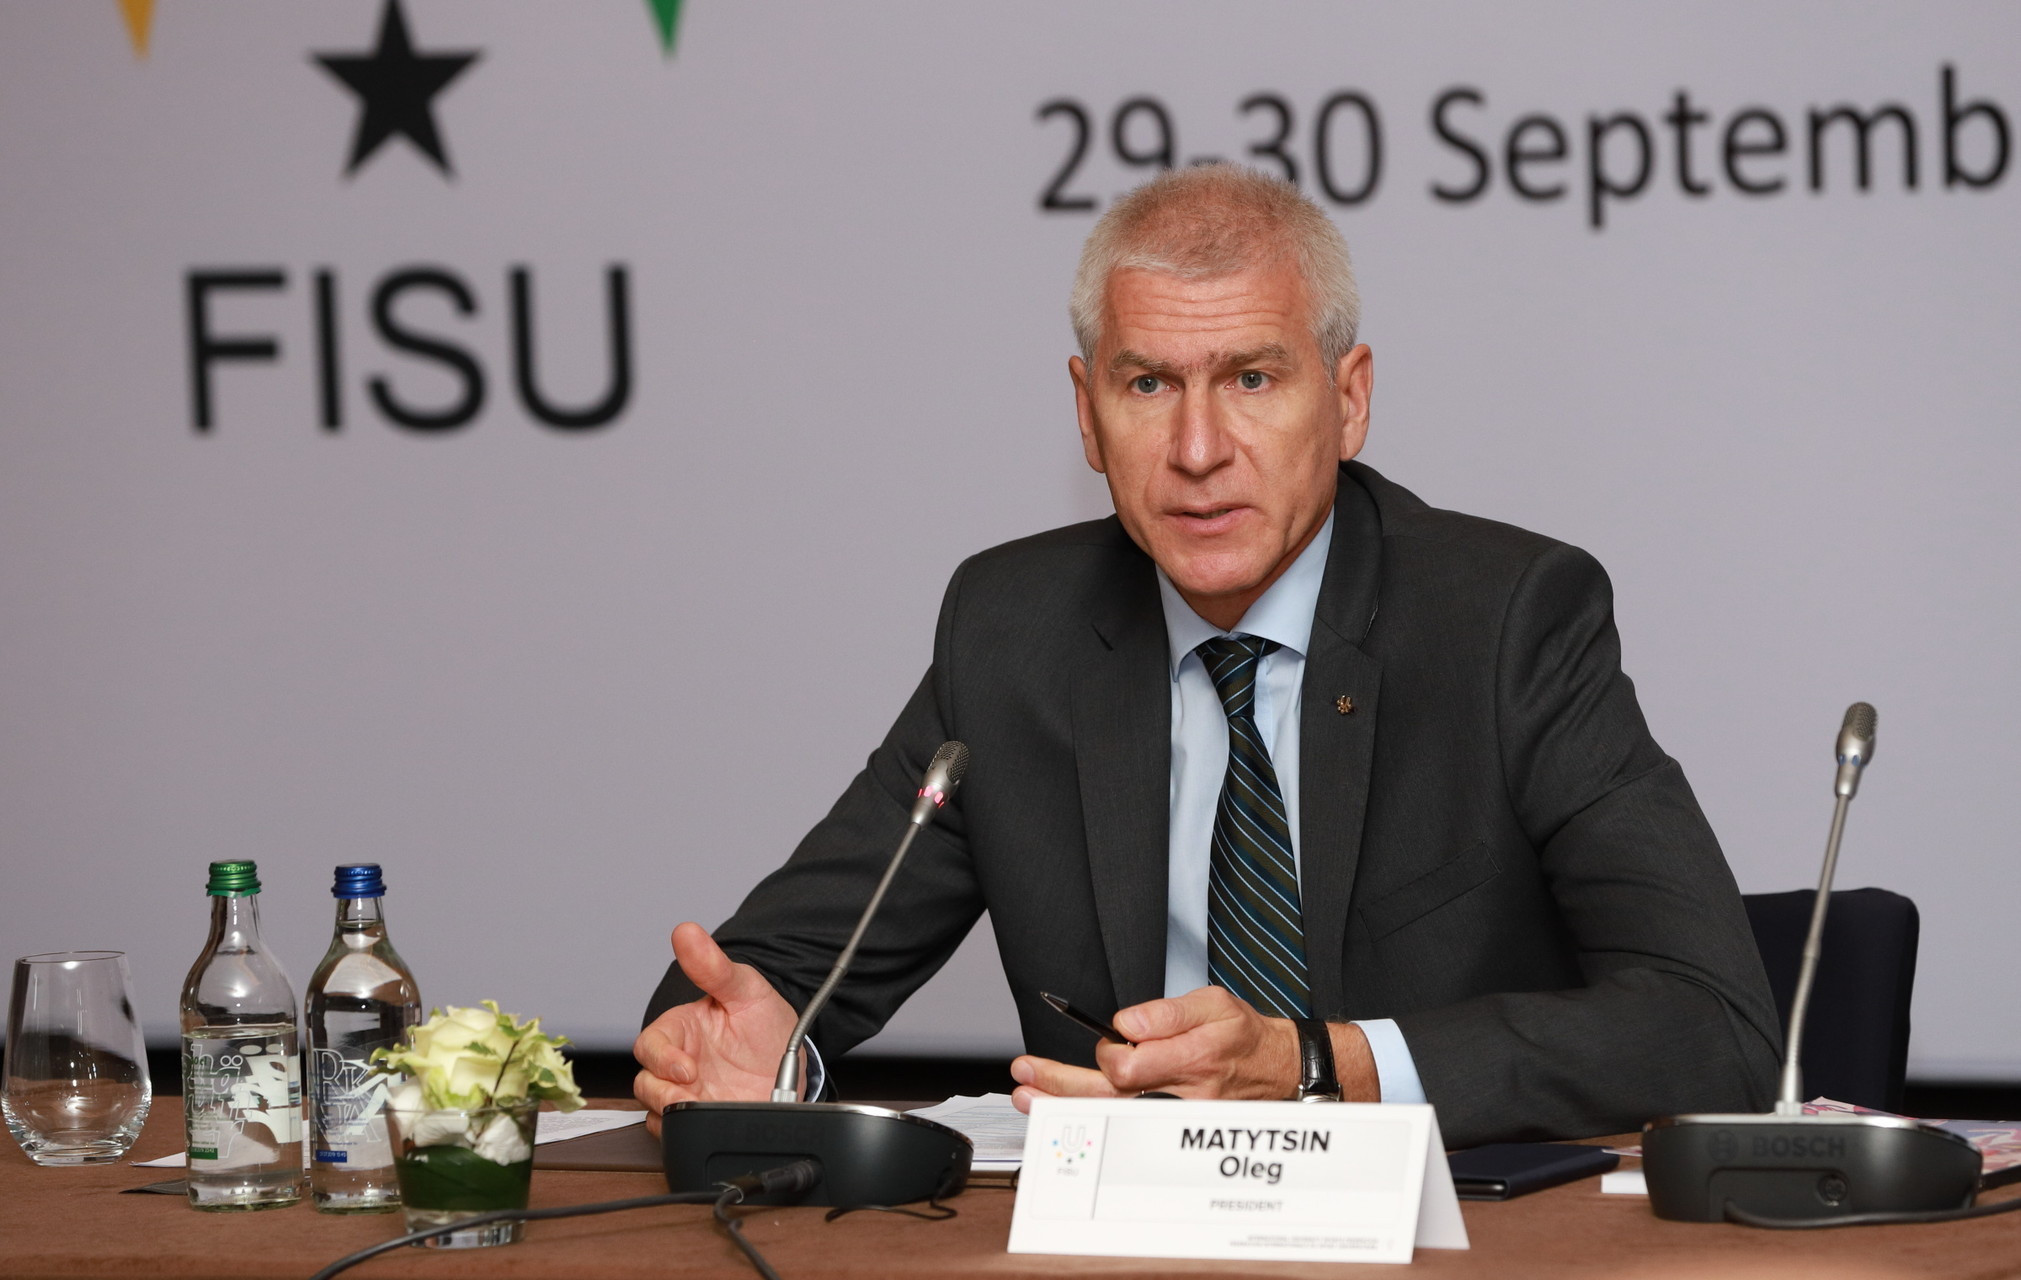 Oleg Matytsin has been forced to temporarily step aside as FISU President, although the length of his term could be extended if a vote is passed tomorrow ©FISU